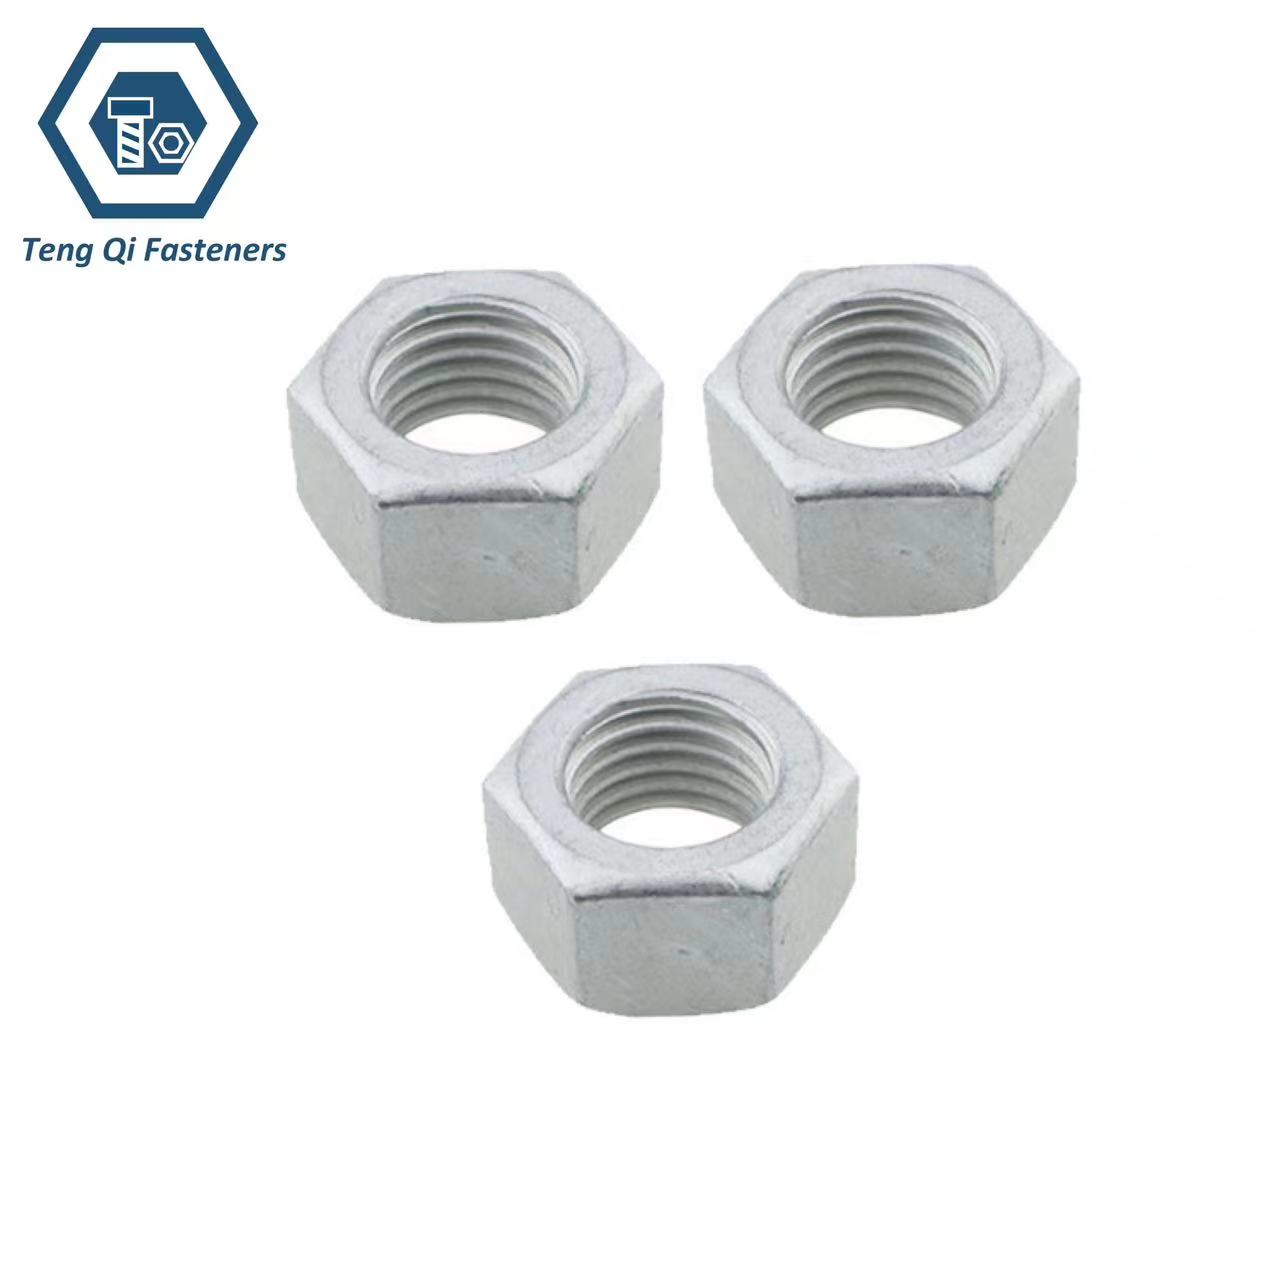 Italian Standard UNI5713 Hot Dip Galvanized High-Strength Large Hexagon Nuts For Structural Bolting